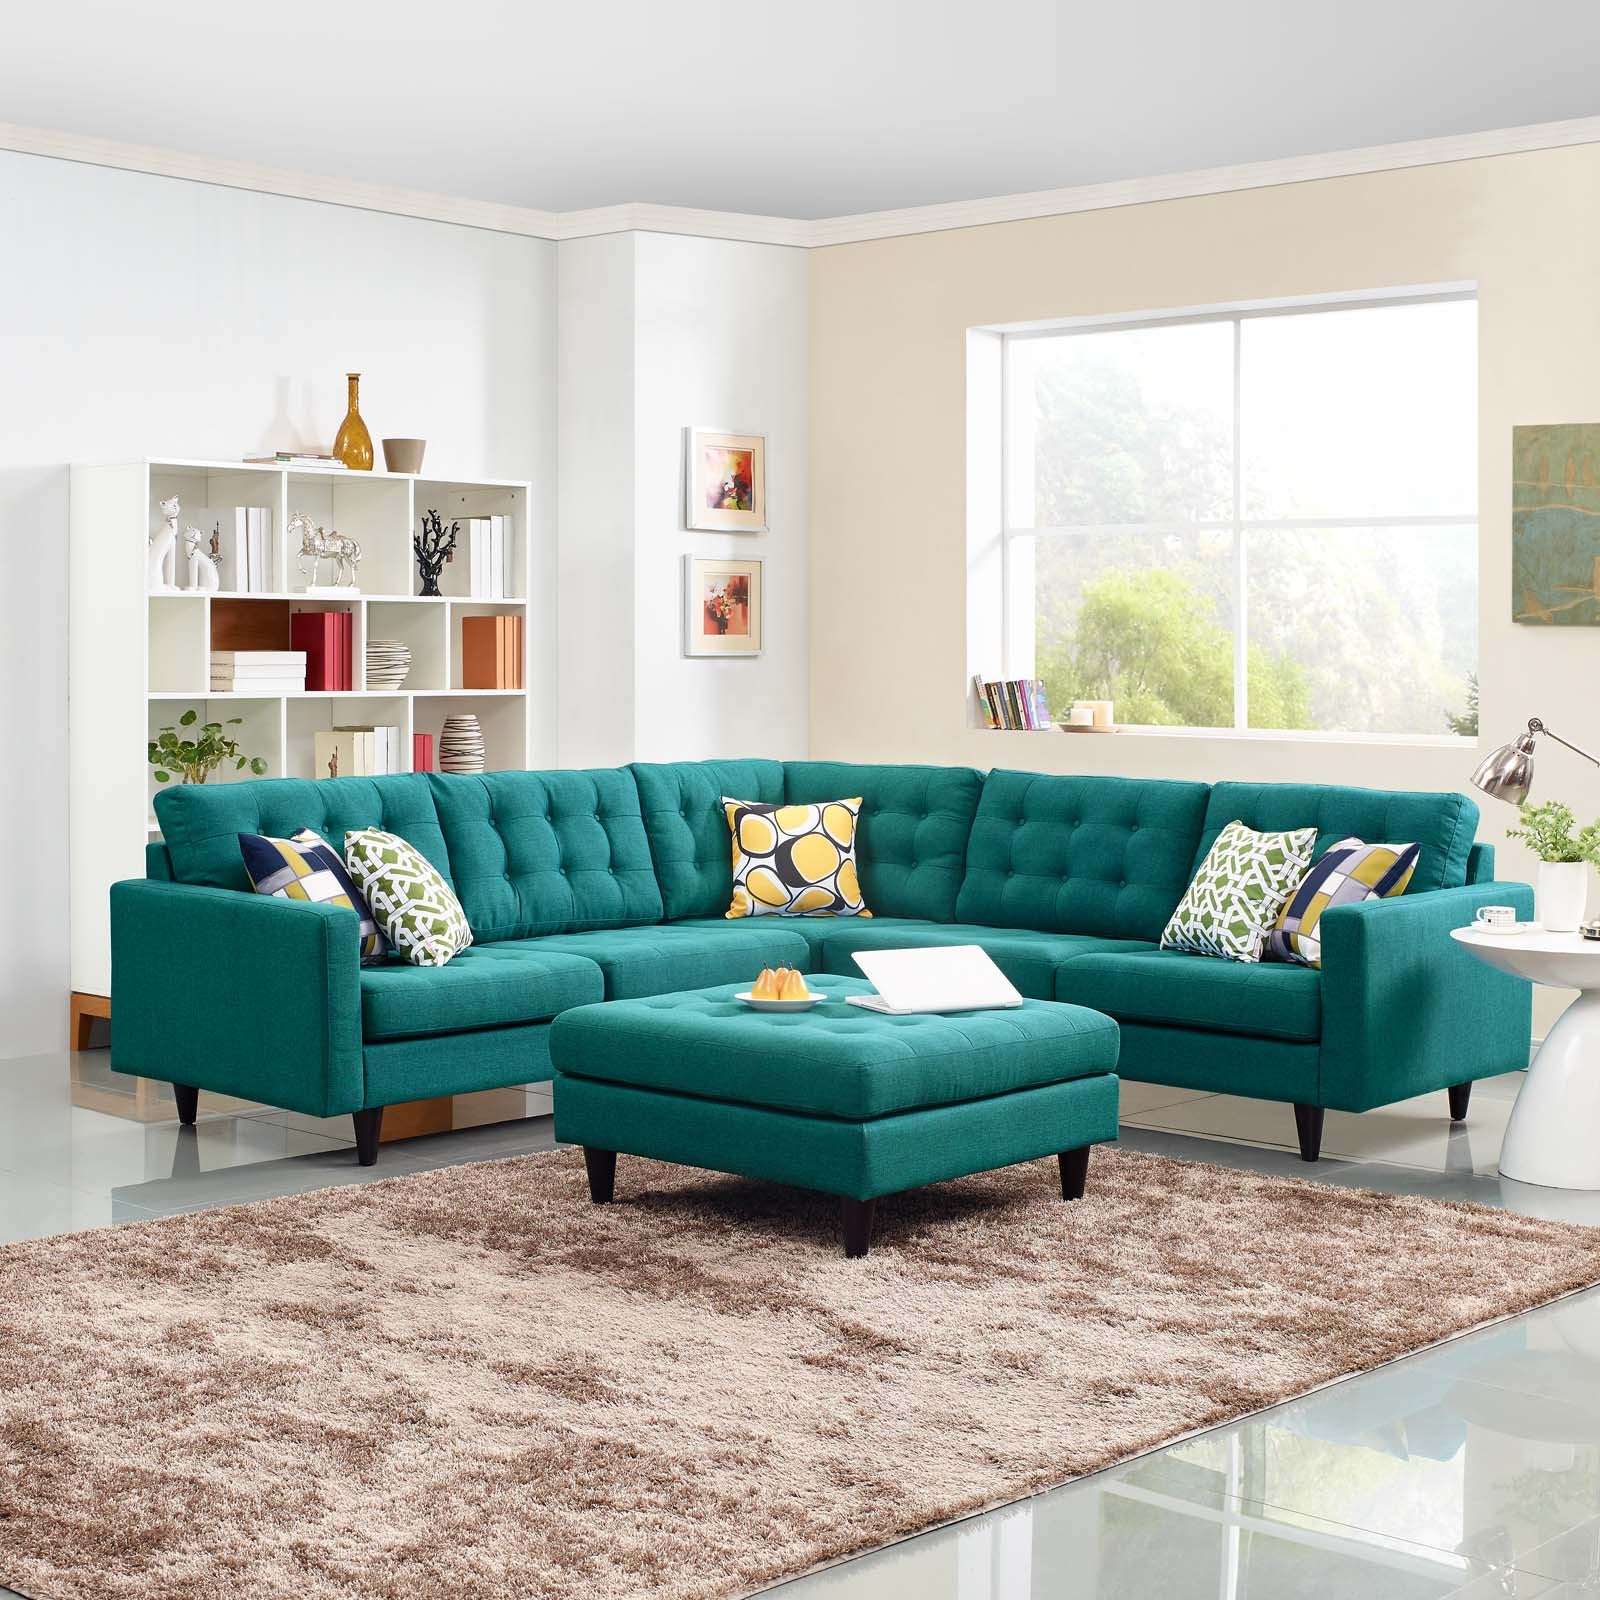 Modway Sectional Sofas - Empress 3 Piece Upholstered Fabric Sectional Sofa Set Teal